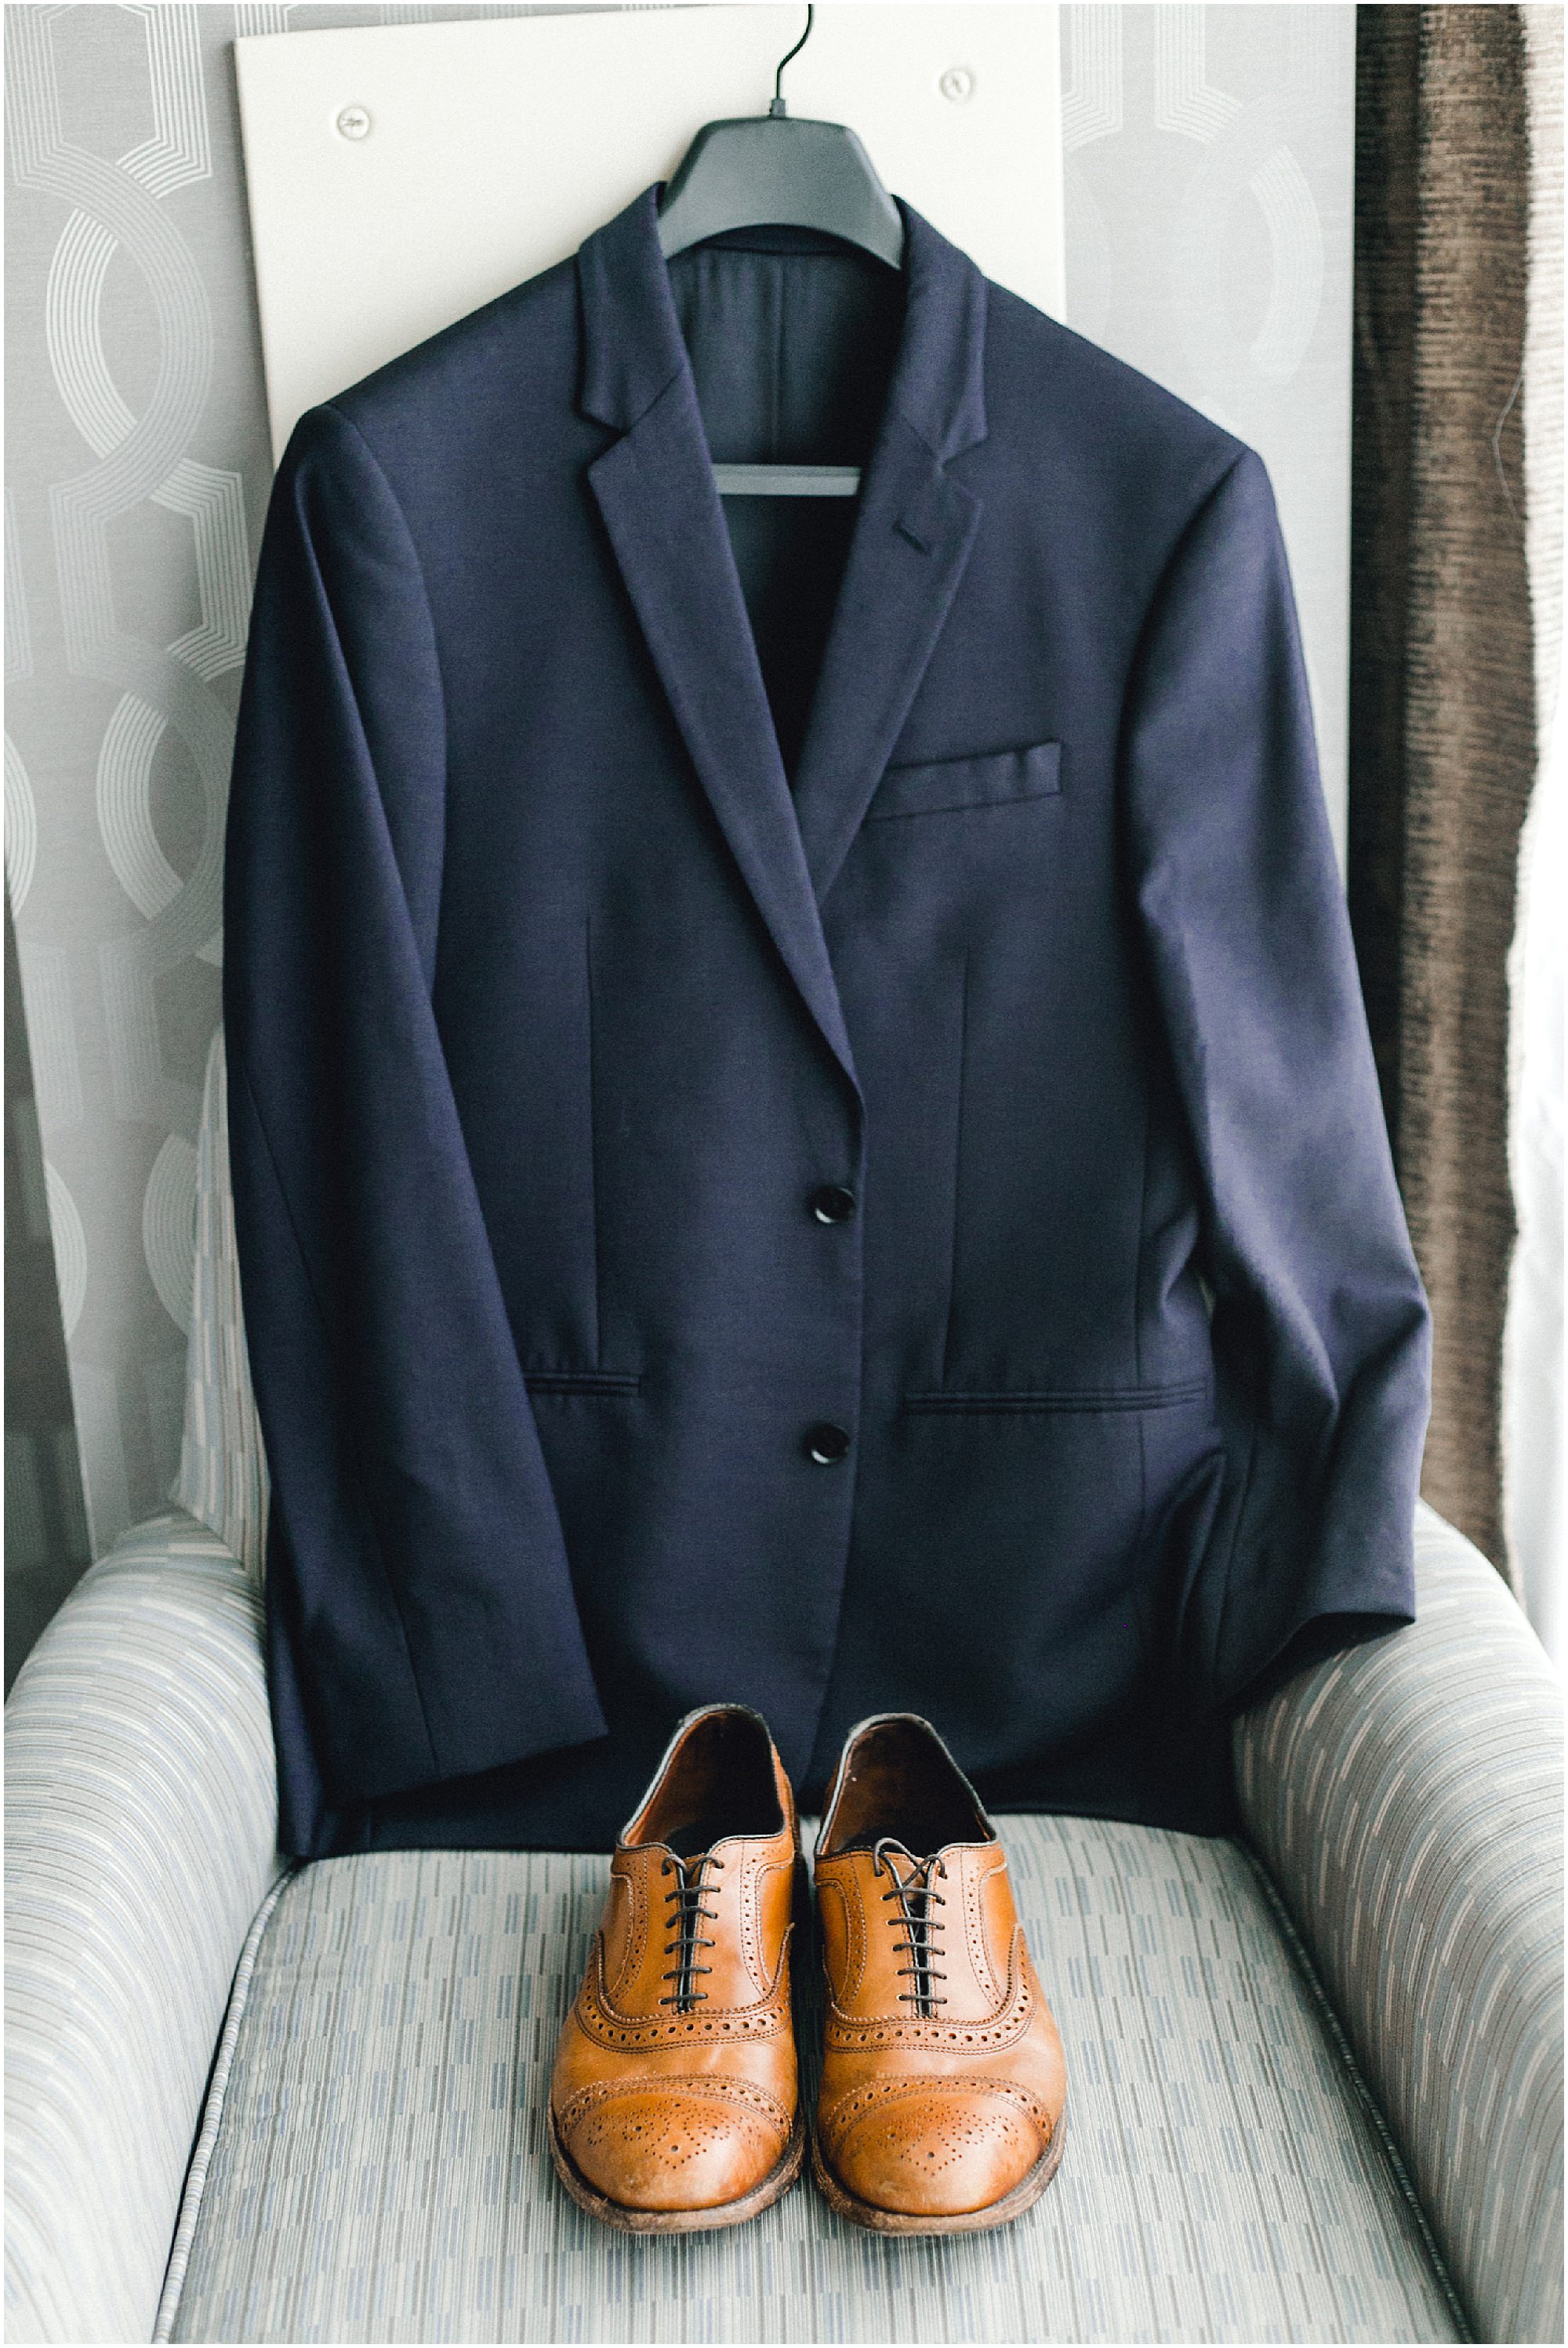 Grooms navy blue jacket and brown shoes